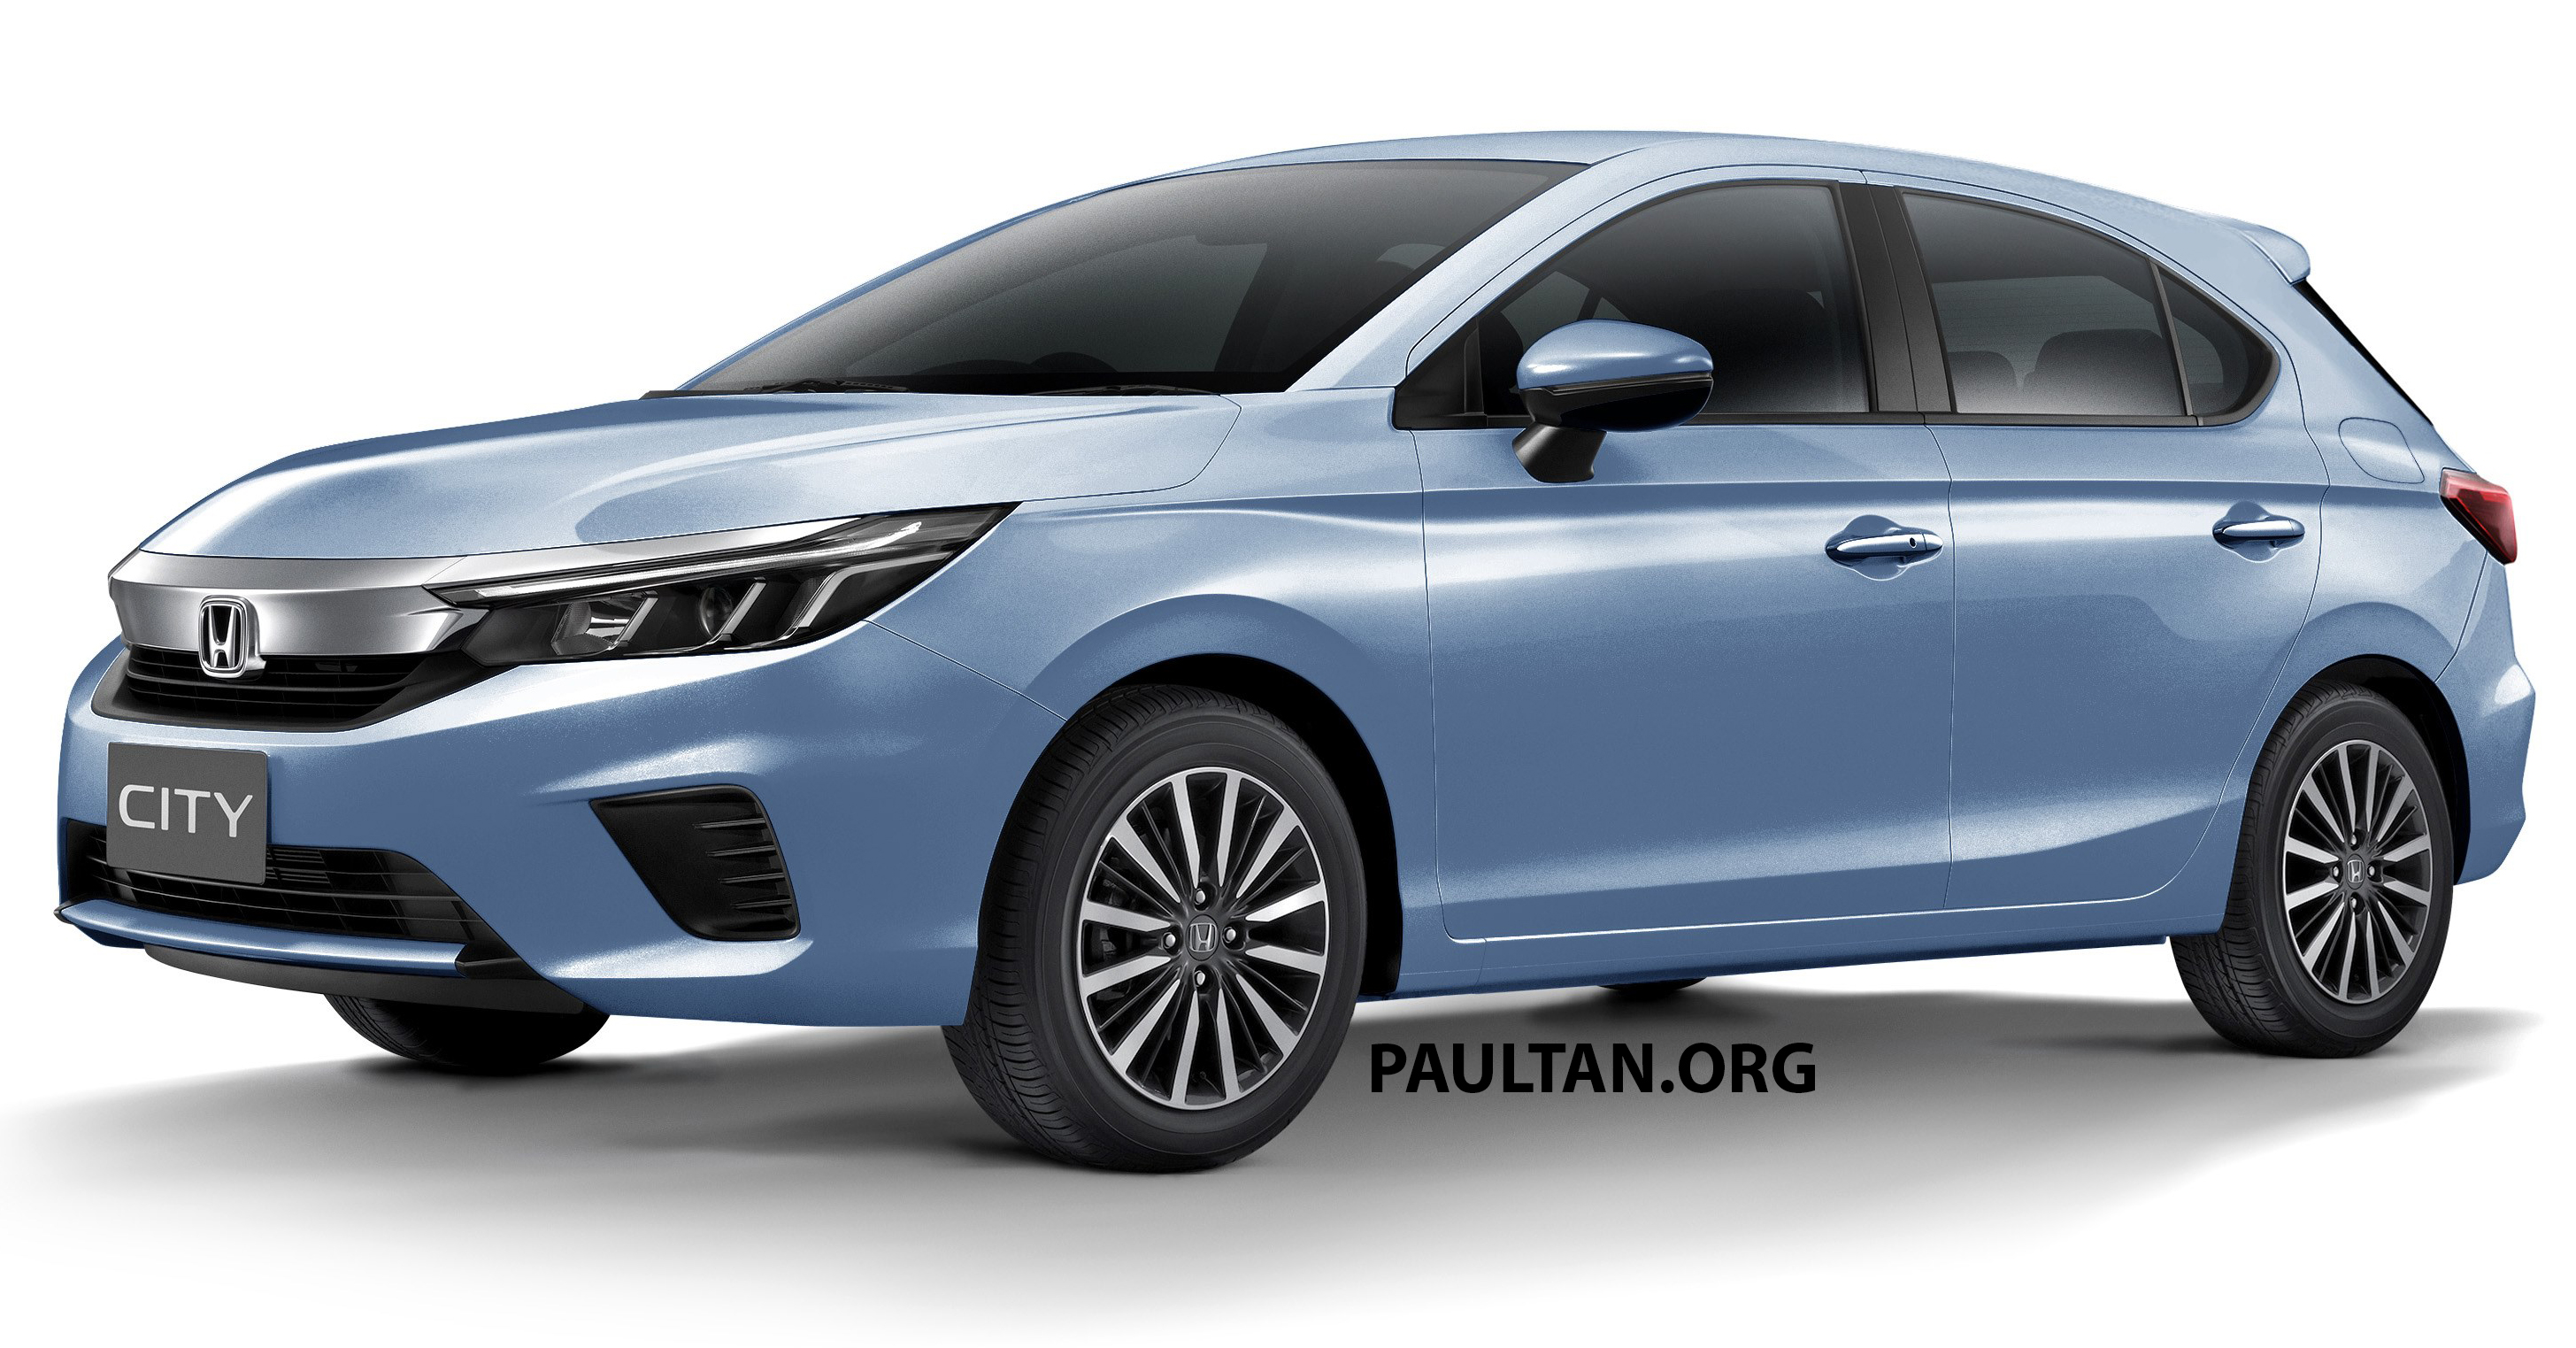 2021 Honda City Hatchback rendered - would you prefer this over a new ...